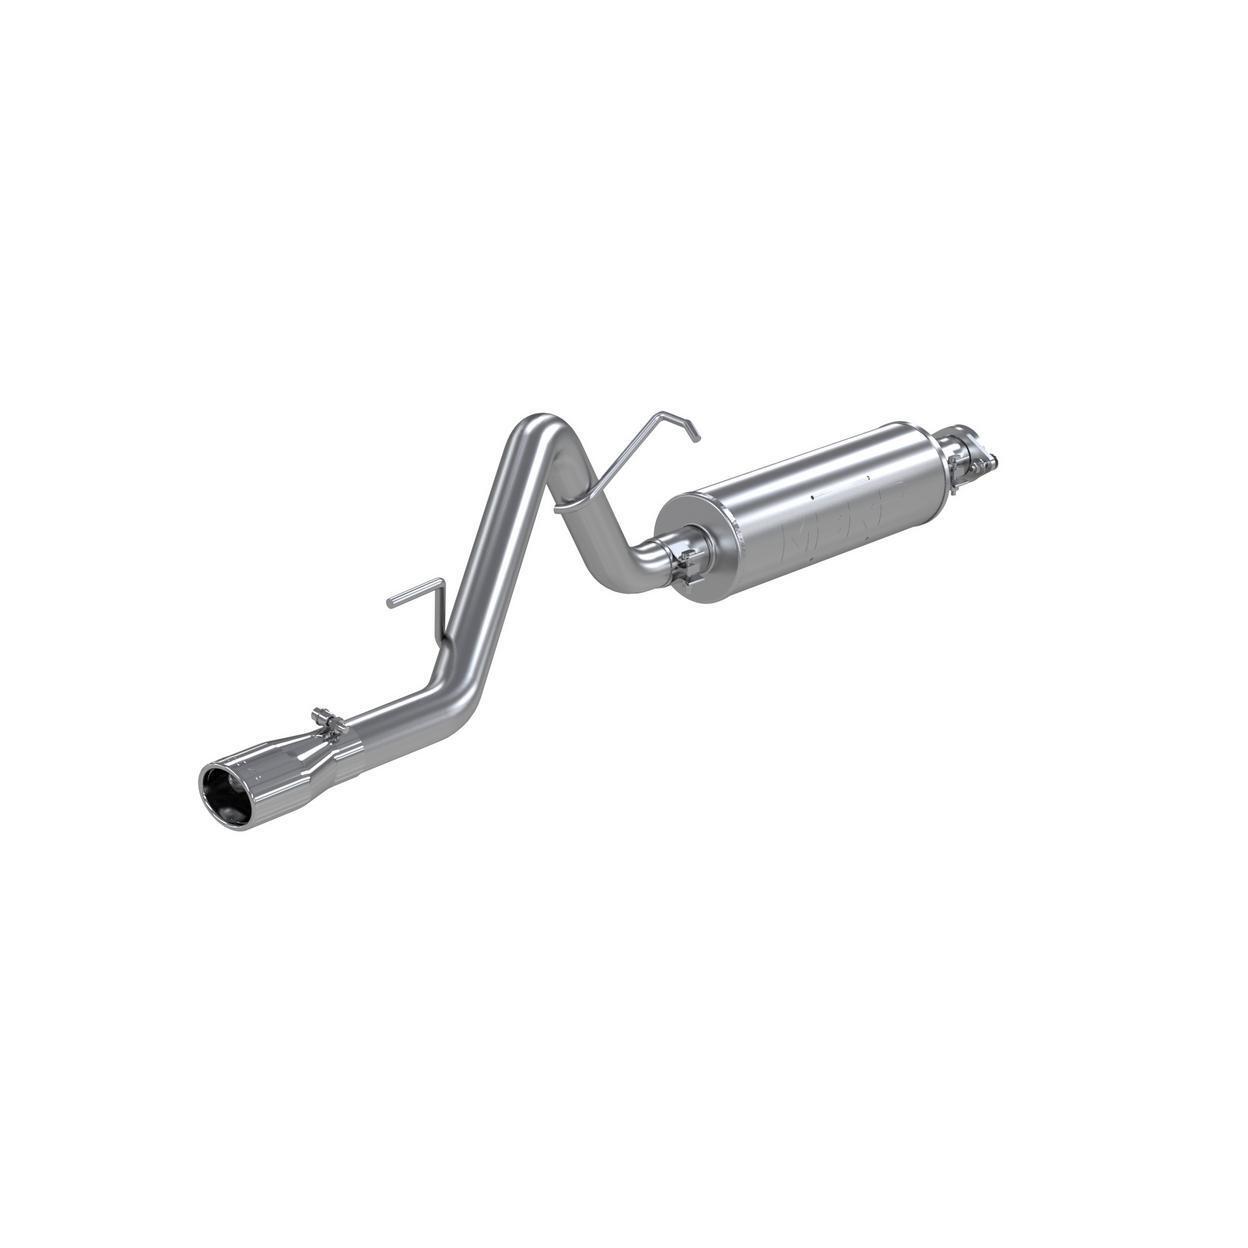 MBRP S5510409-AX Exhaust System Kit Fits 2006 Jeep Liberty